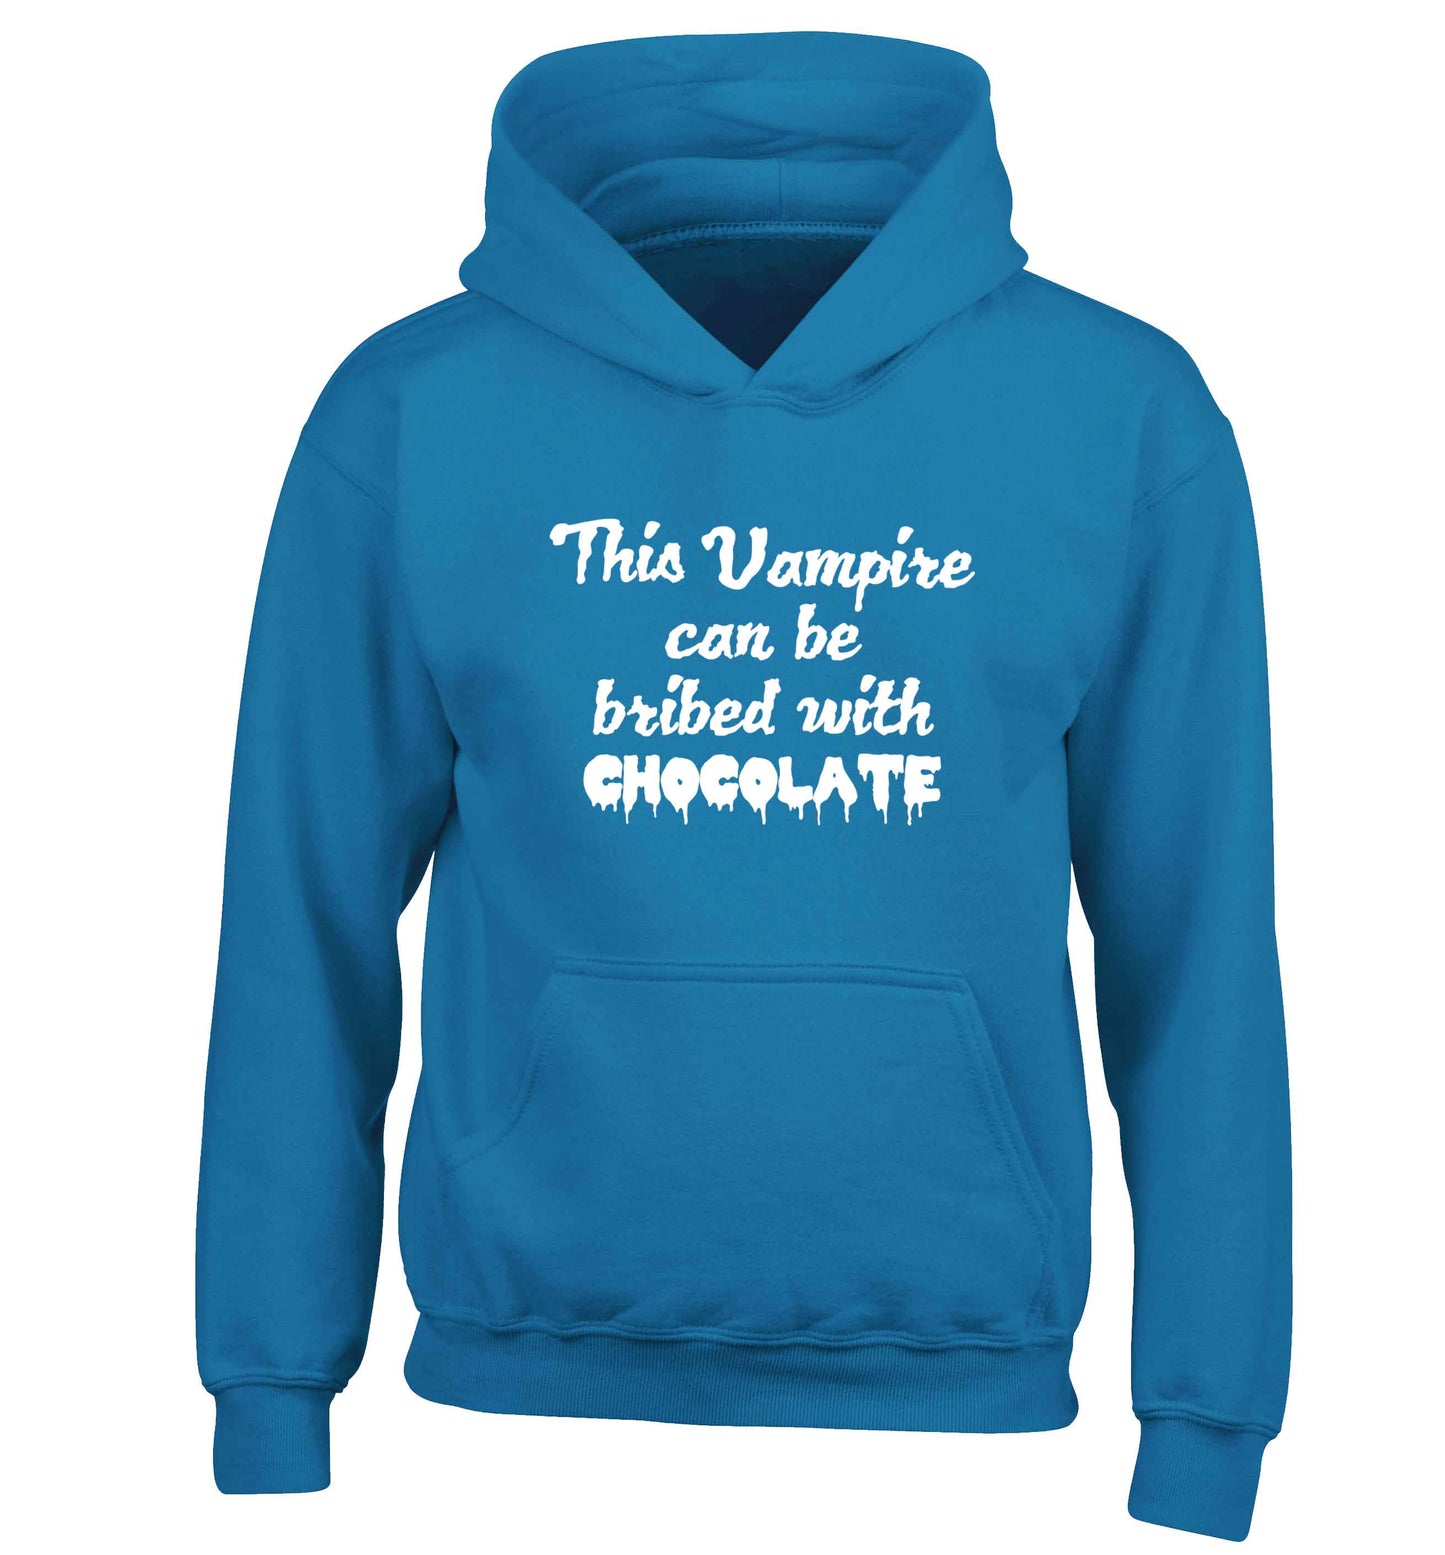 This vampire can be bribed with chocolate children's blue hoodie 12-13 Years